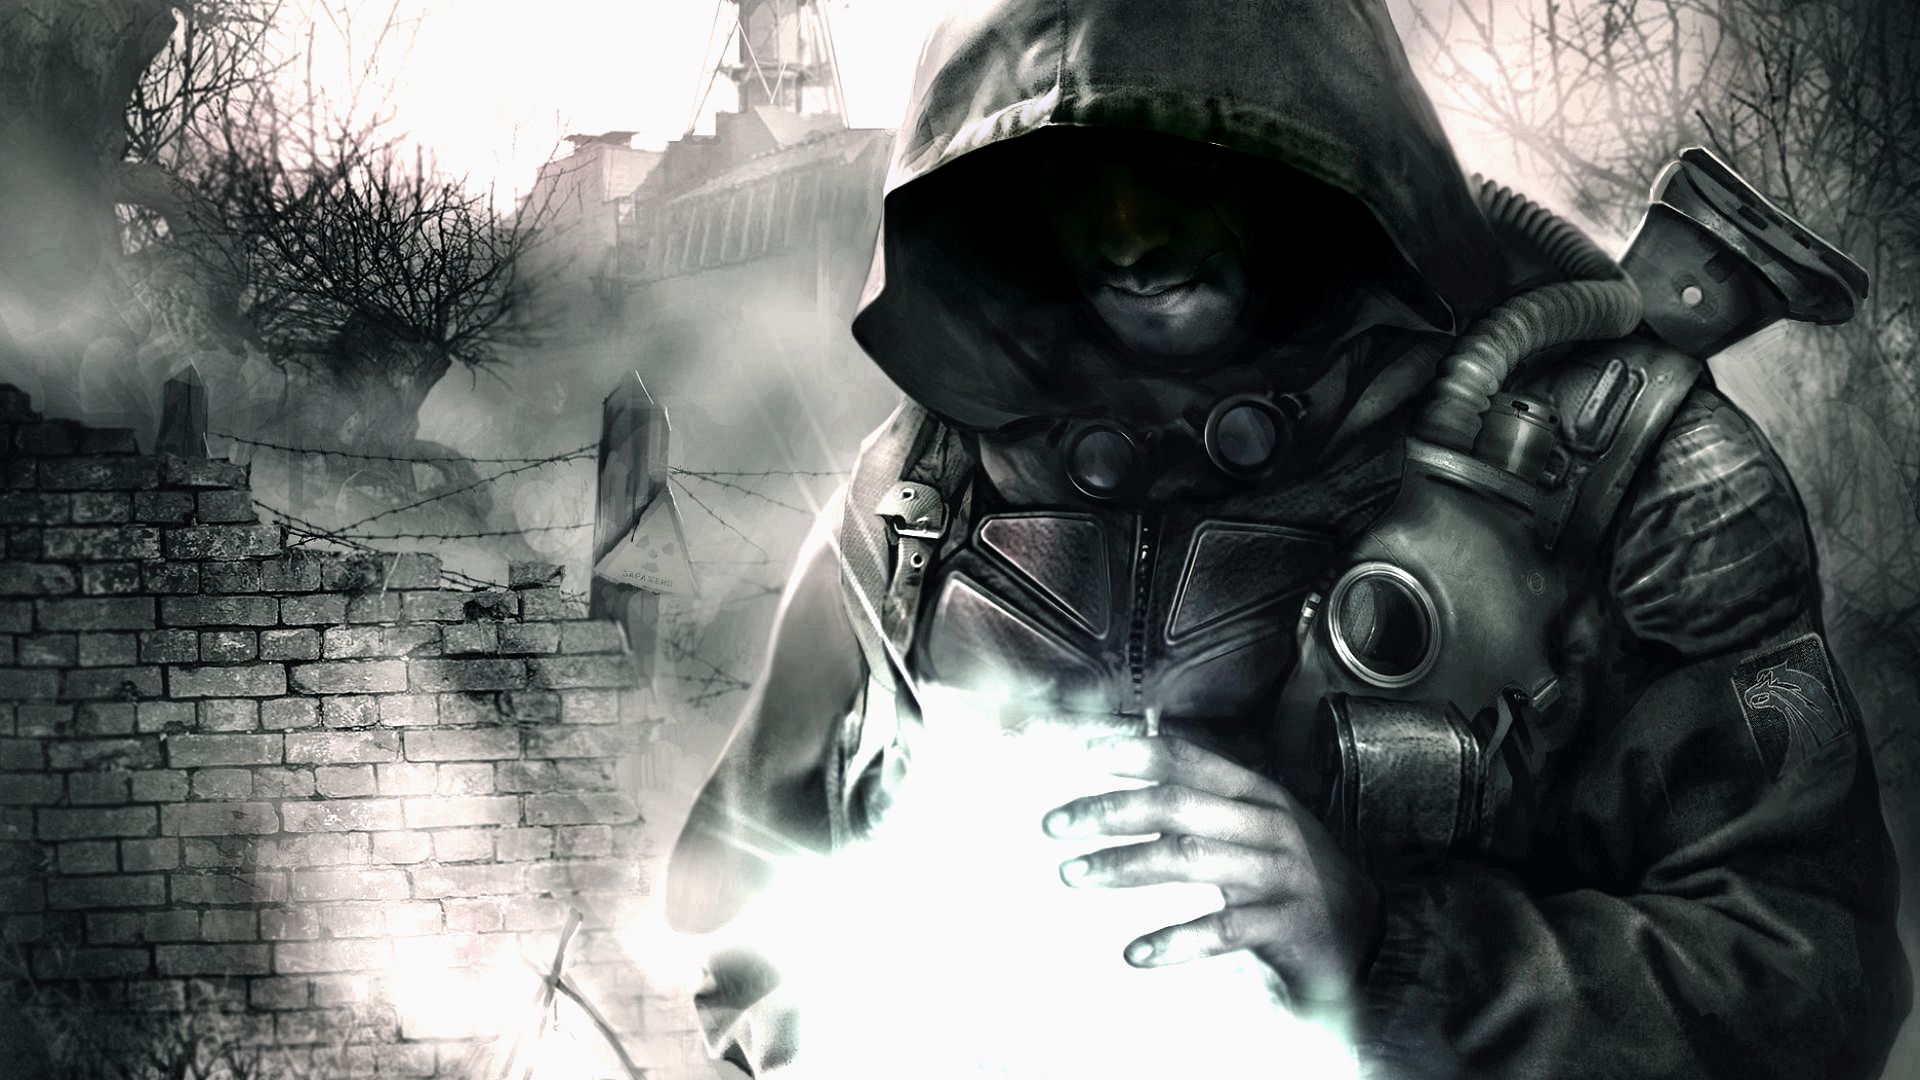 General 1920x1080 S.T.A.L.K.E.R. S.T.A.L.K.E.R.: Clear Sky video games video game art